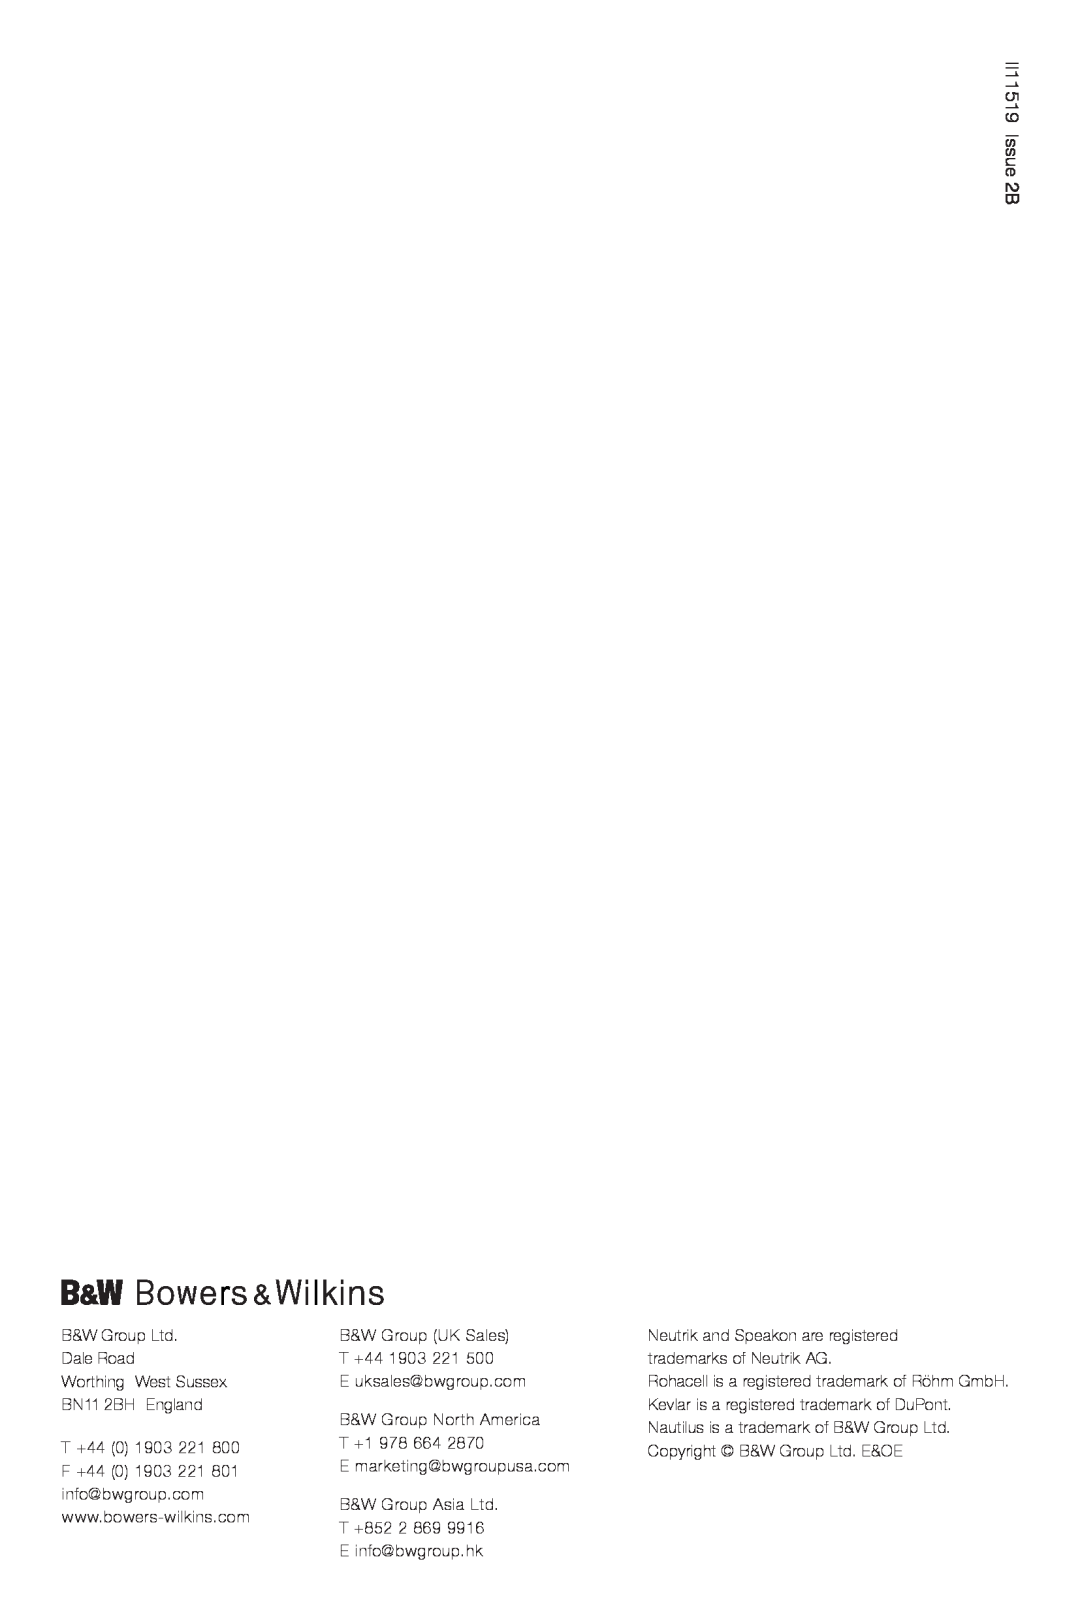 Bowers & Wilkins CT8.4 LCRS owner manual II11519 Issue 